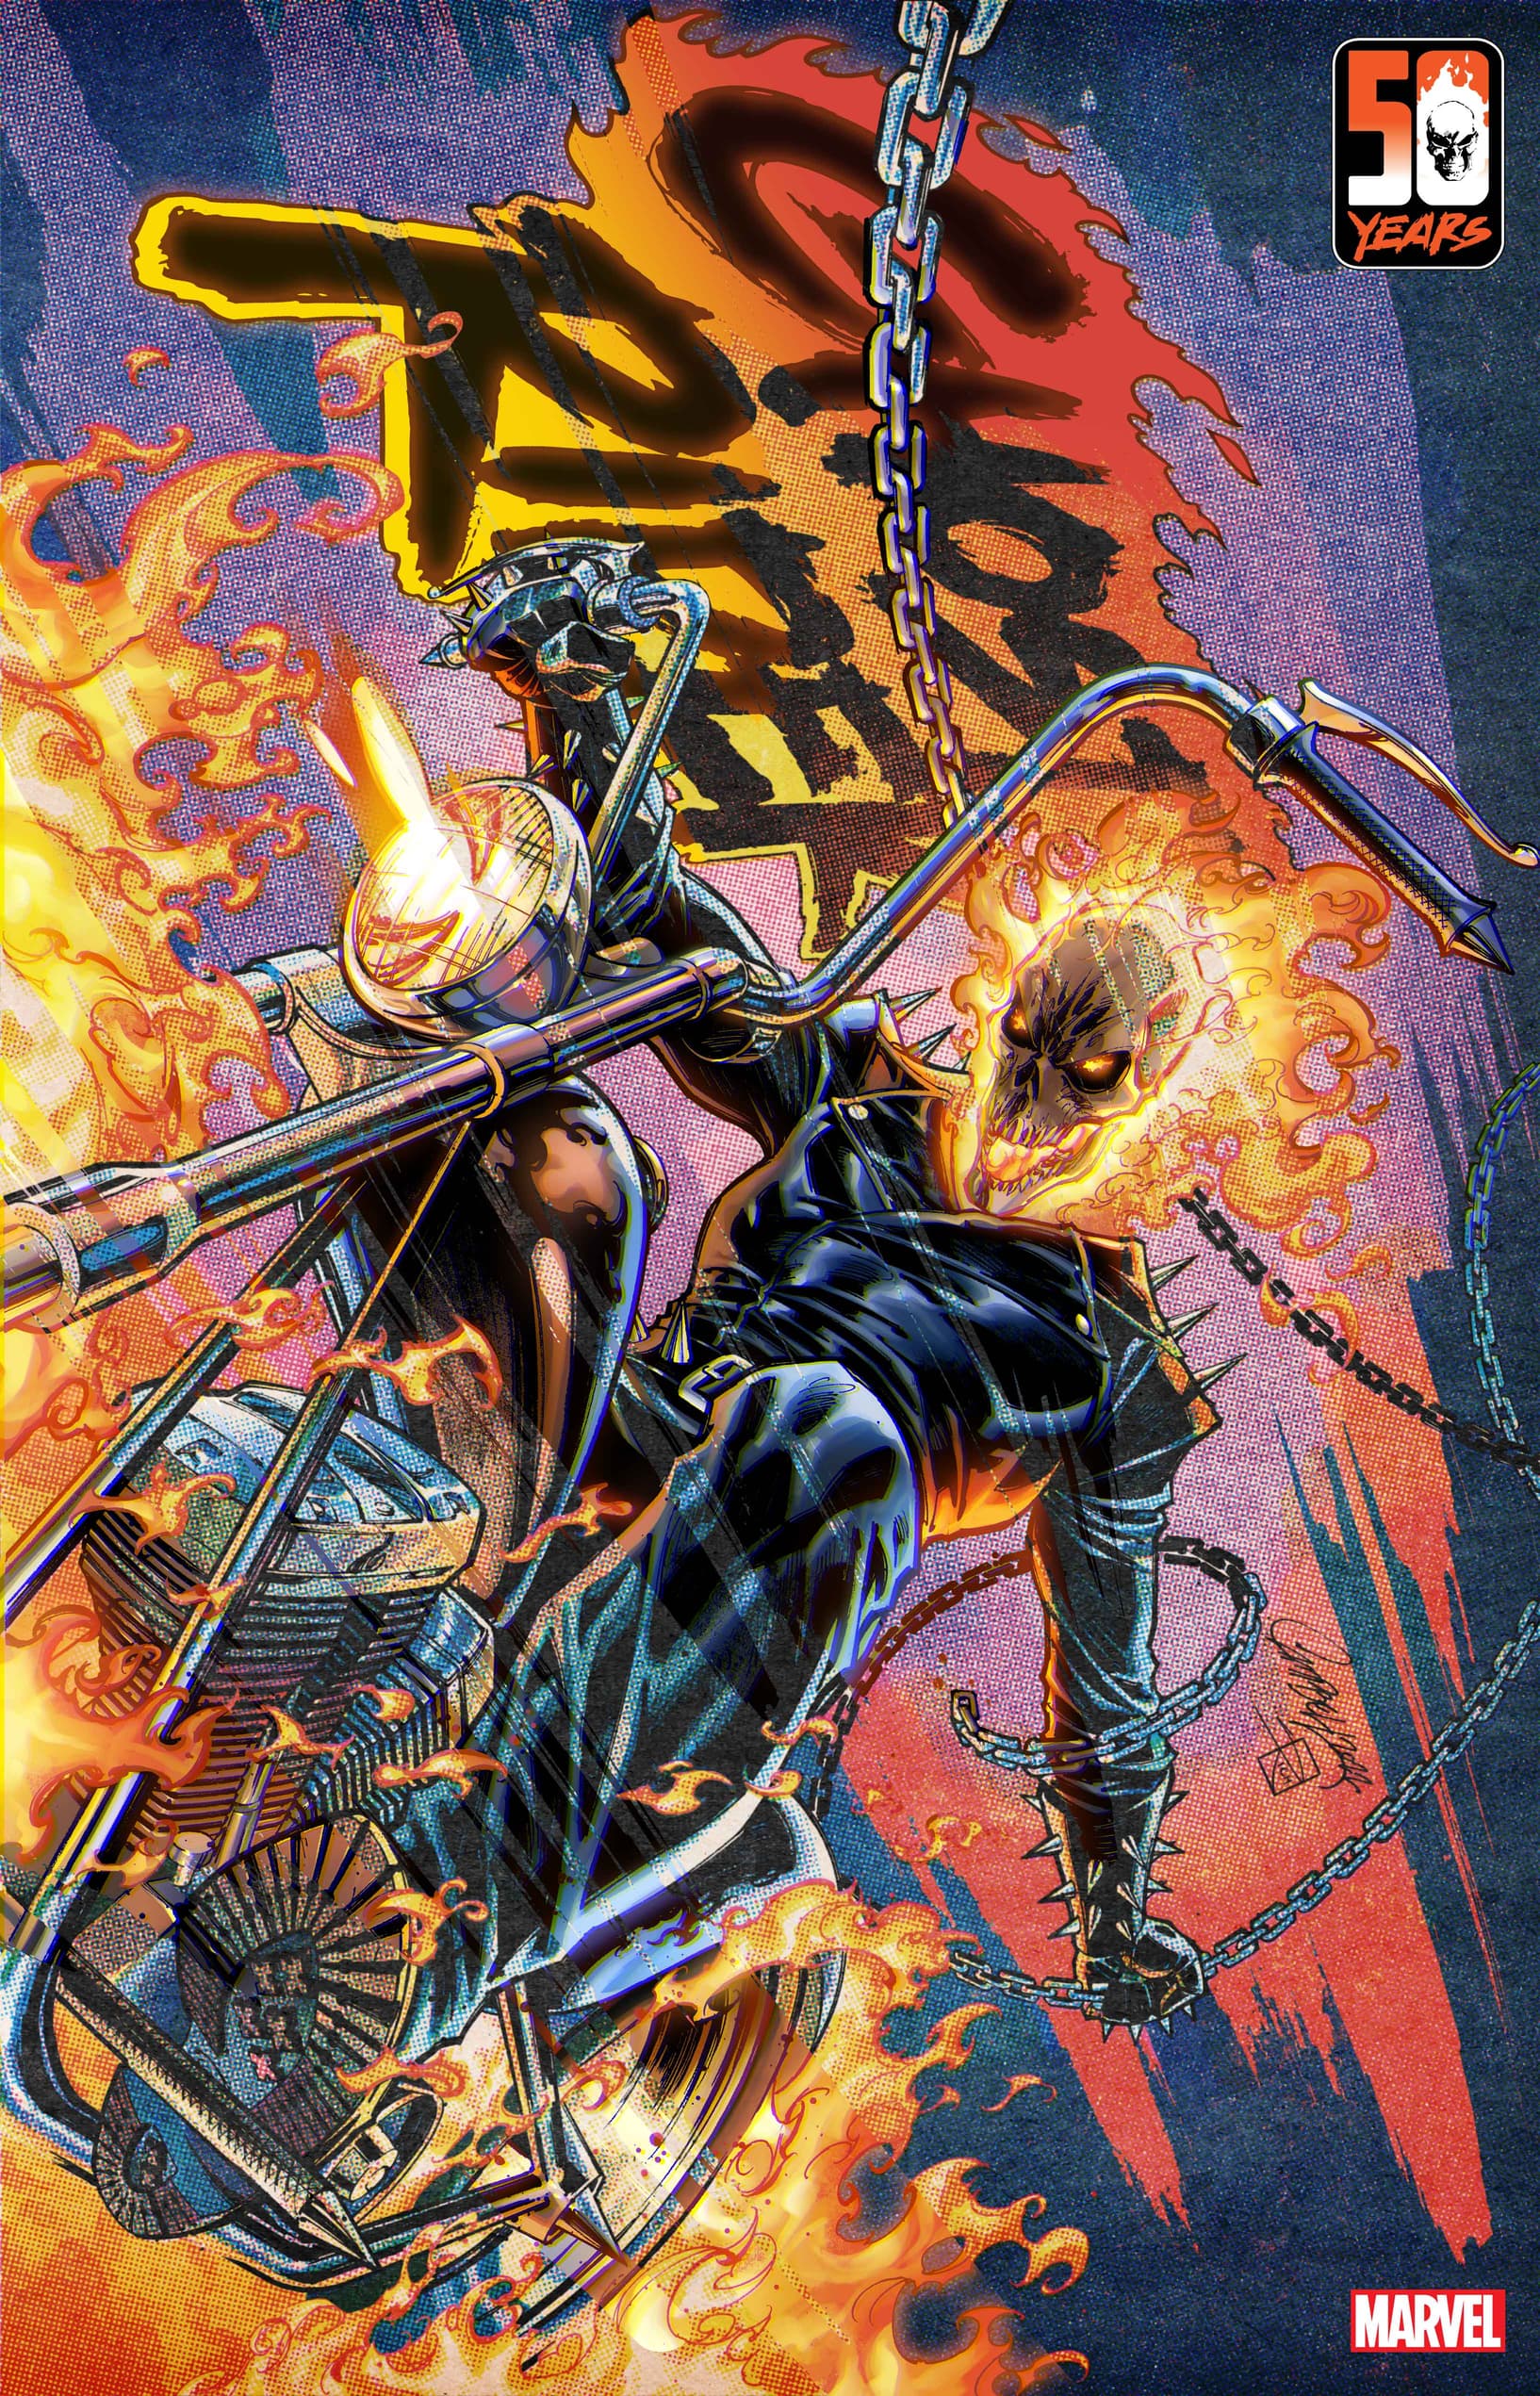 Ghost Rider #11 Anniversary Variant Cover by J. SCOTT CAMPBELL